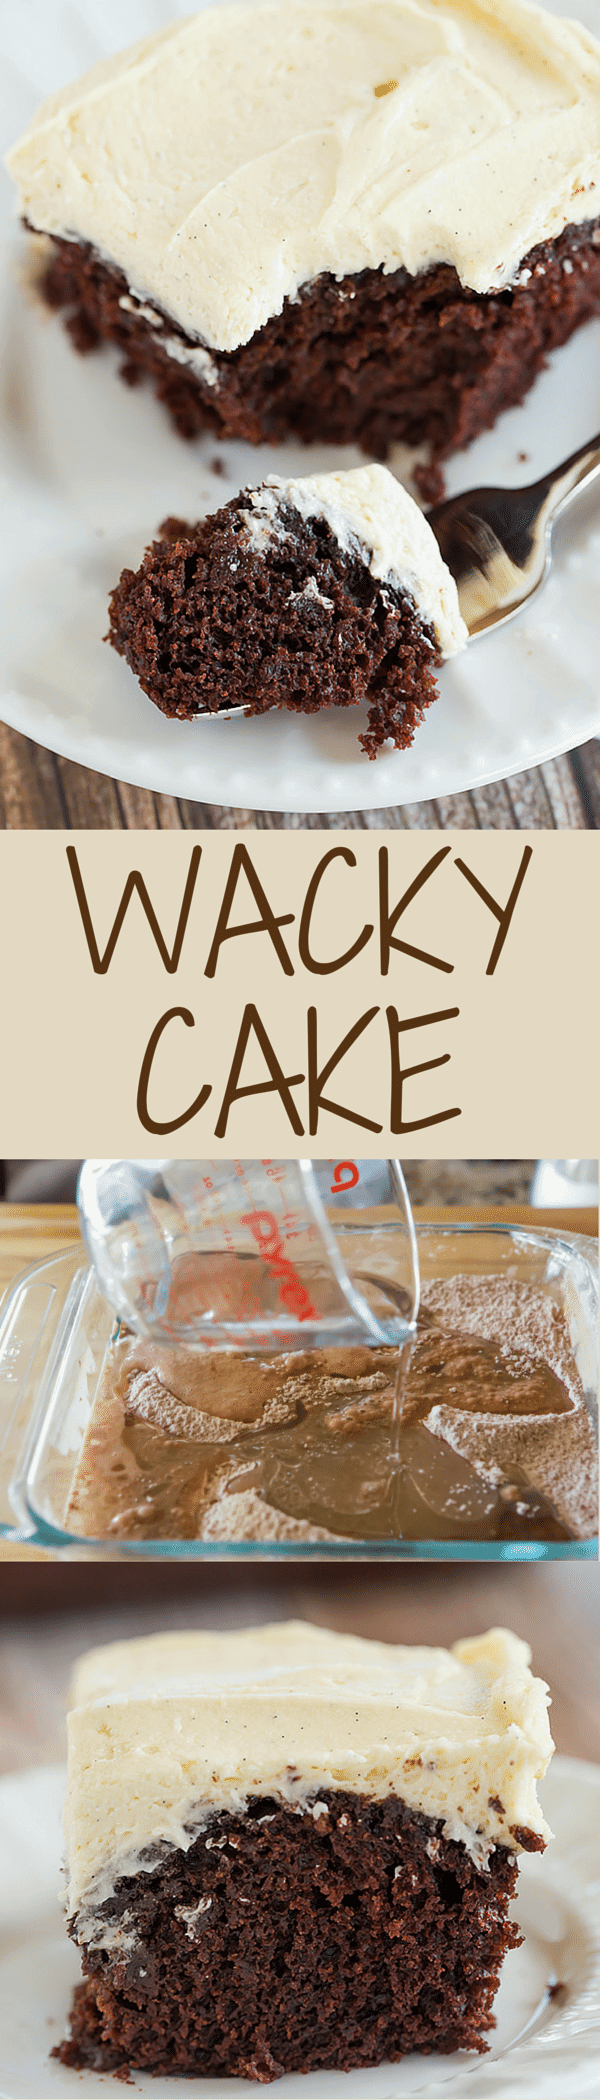 Wacky Cake! Chocolate cake with a simple vanilla frosting - the cake recipe, which uses no butter, eggs or milk, was popular during WWII when rationing was prevalent.